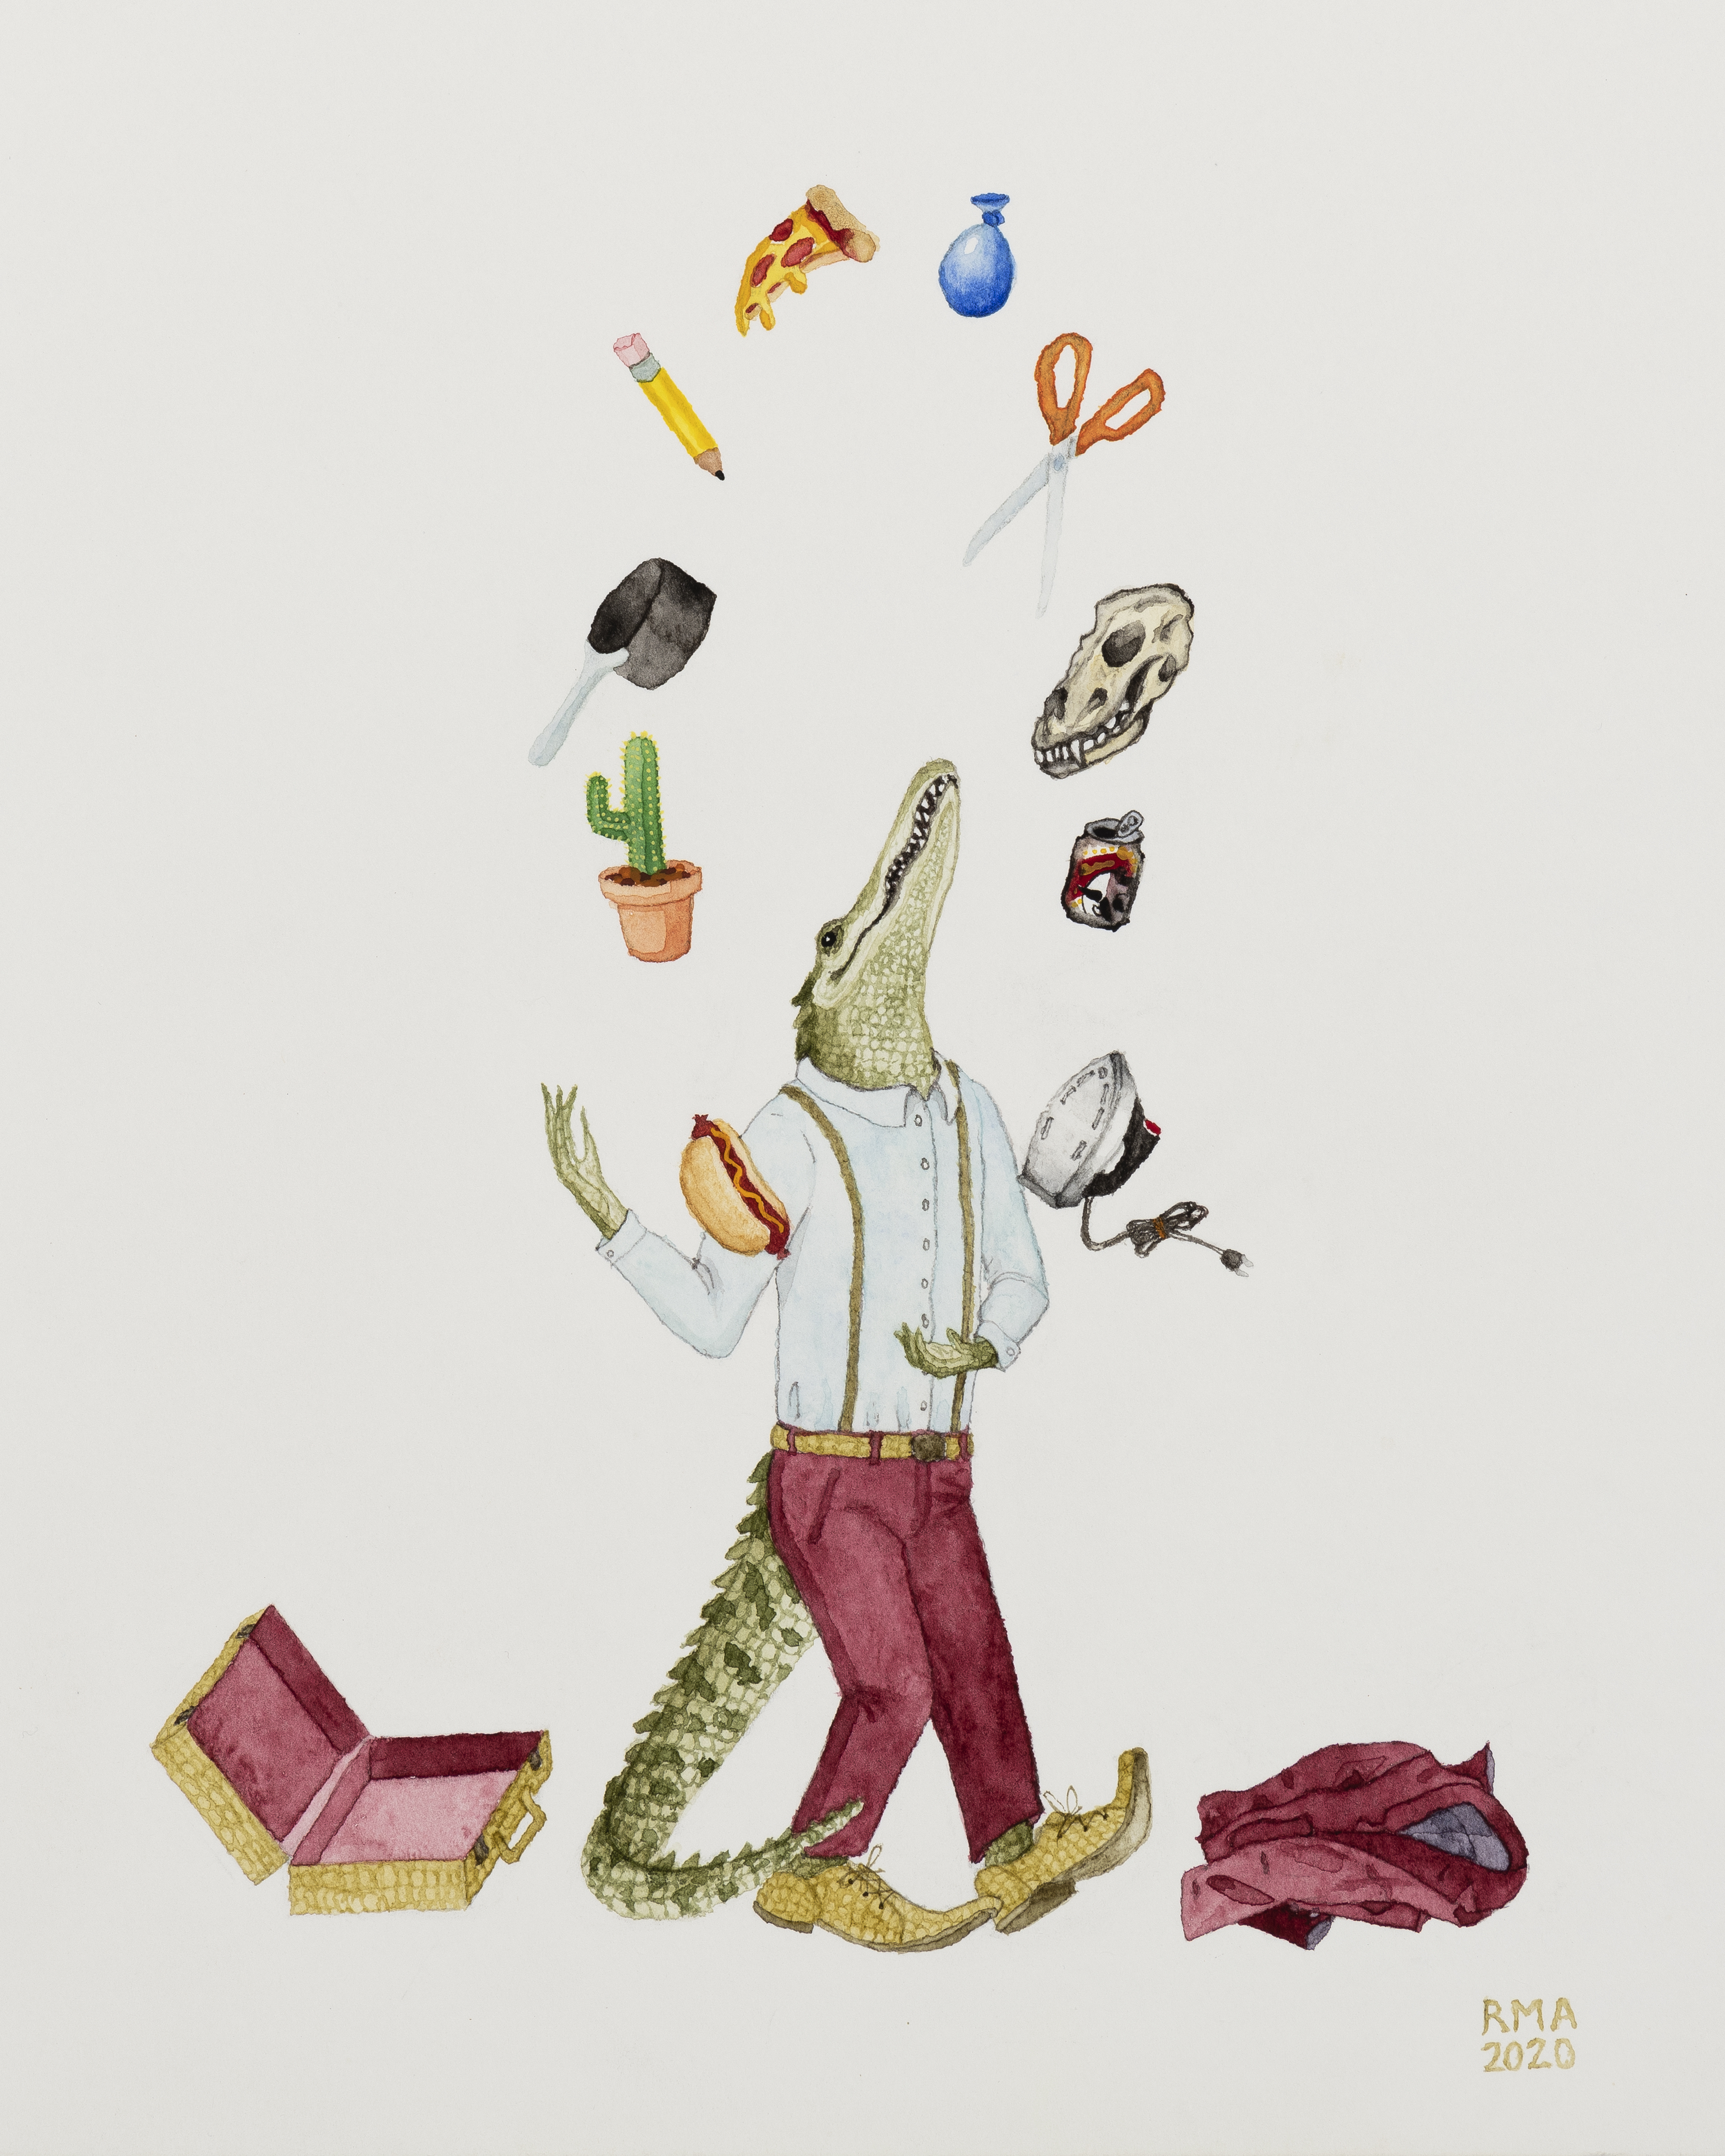 An alligator in a burgundy suit juggling various objects